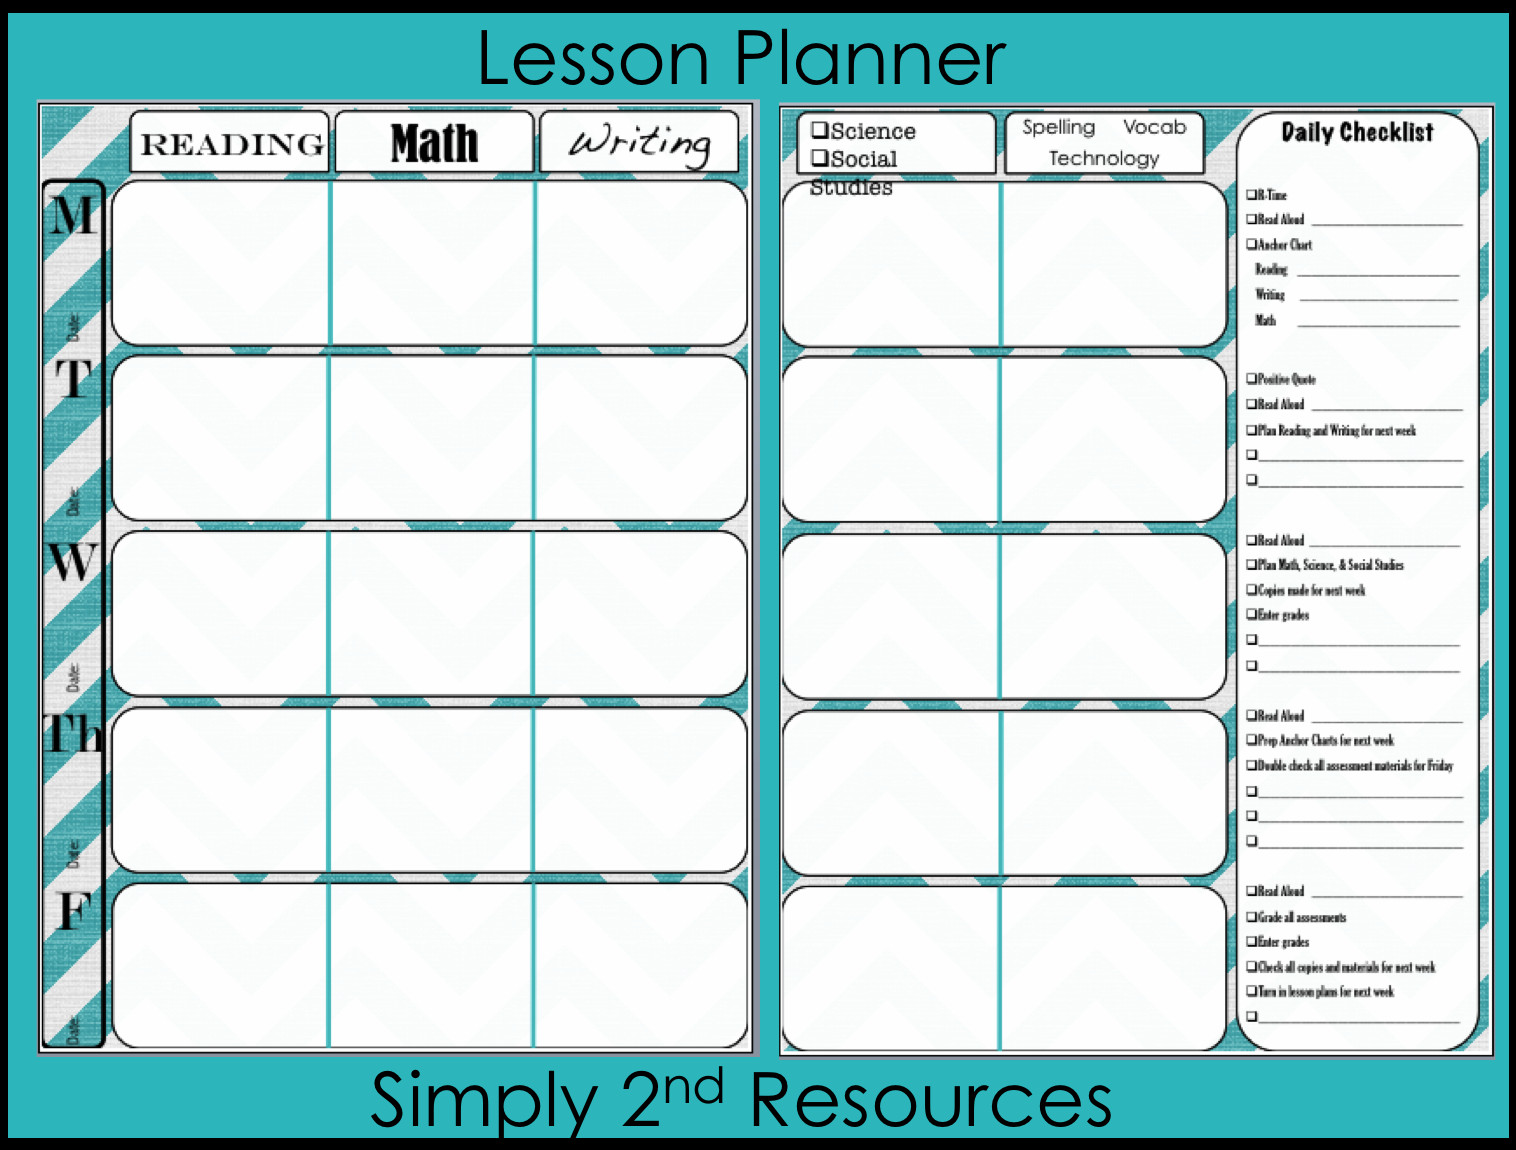 Online Lesson Planner Simply 2nd Resources Lesson Plan Template so Excited to